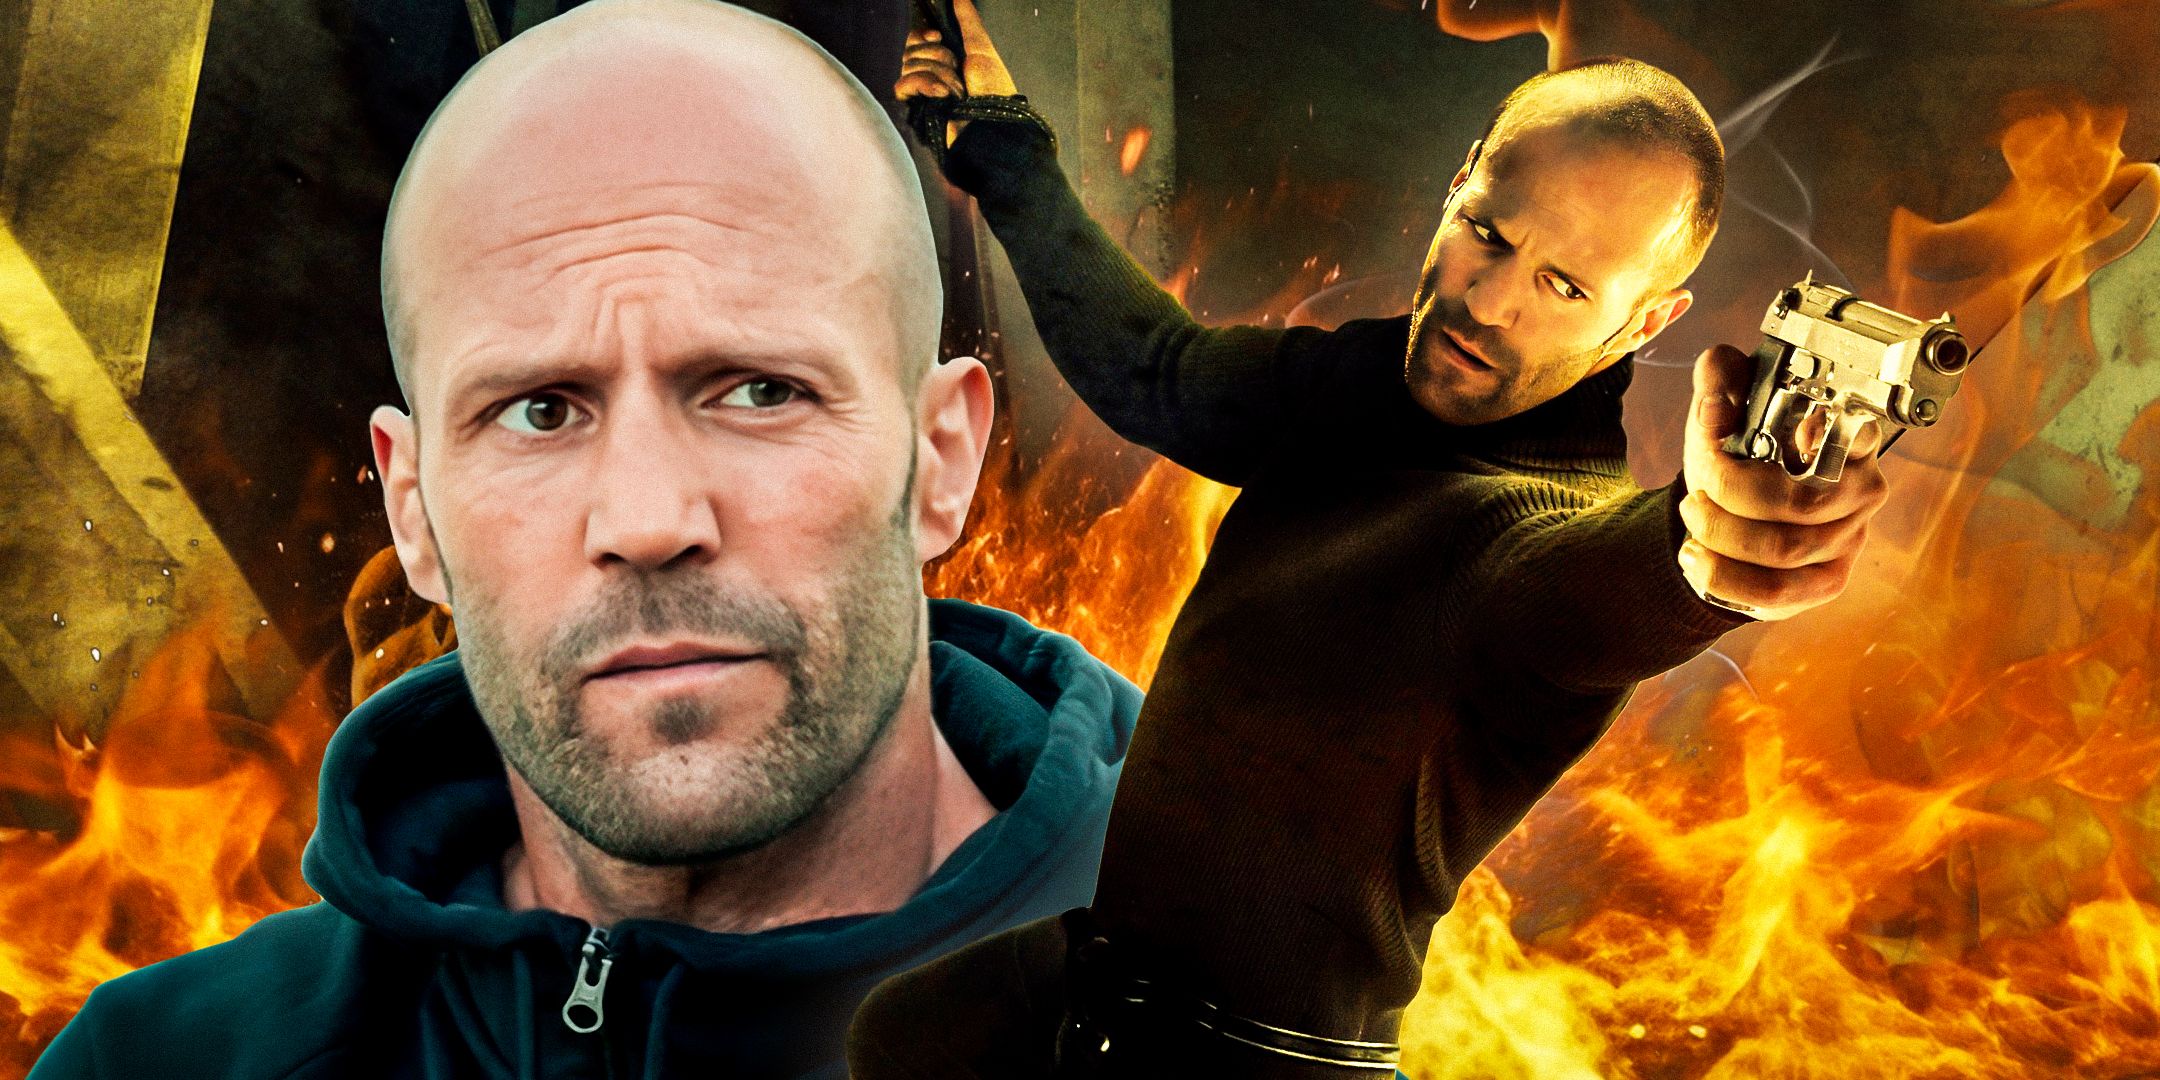 Jason-Statham-as-Phil-Broker-from-Homefront-and-Jason-Statham-as-Jonas-Taylor-from-The-Meg